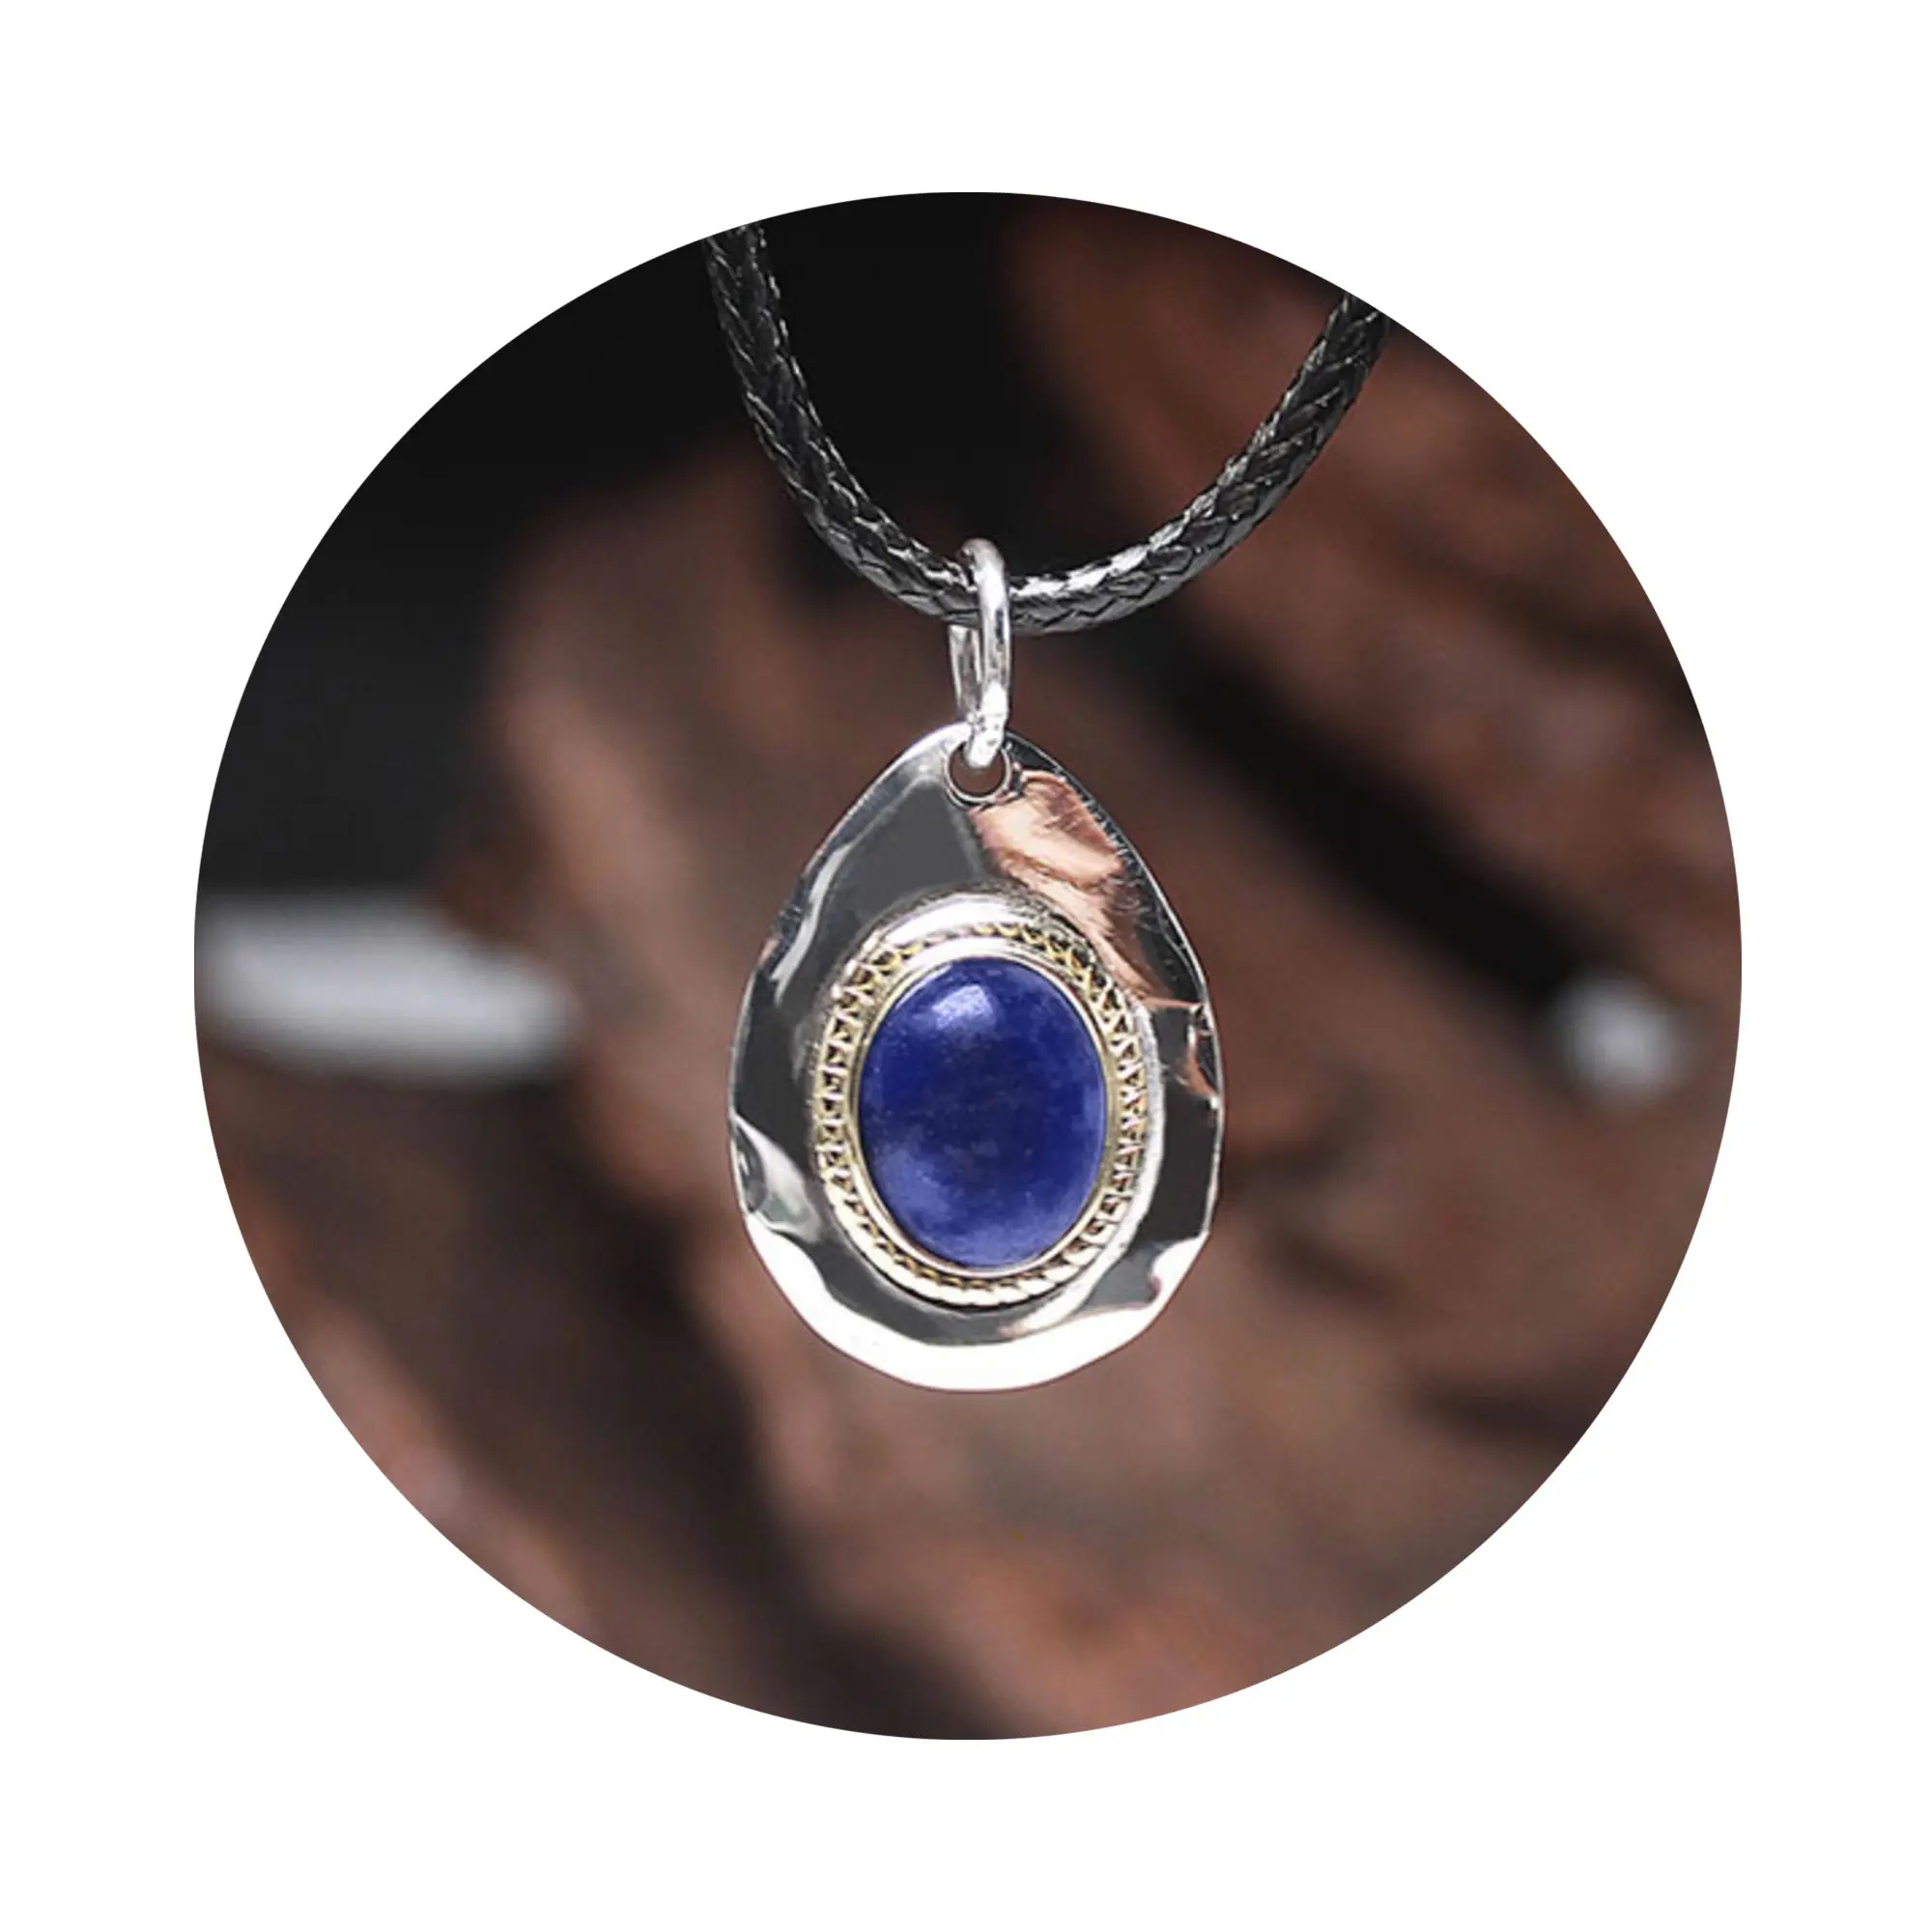 Silversmithing – Making a Pendant with a Custom Bezel Setting for a Cabochon